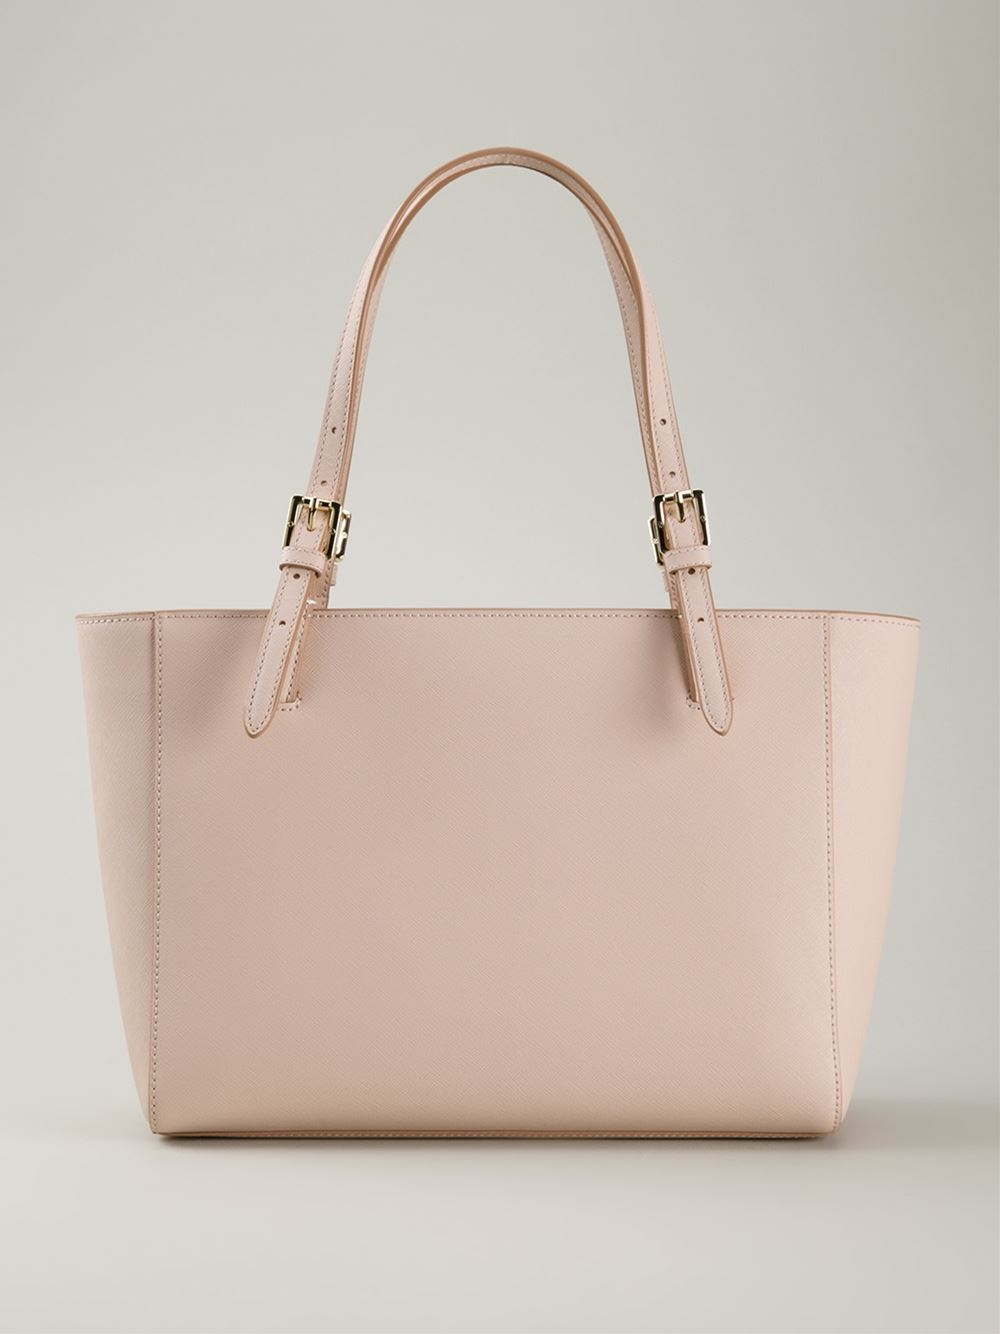 Tory Burch York Blush Pink Leather Tote Bag for Sale in Seattle, WA -  OfferUp